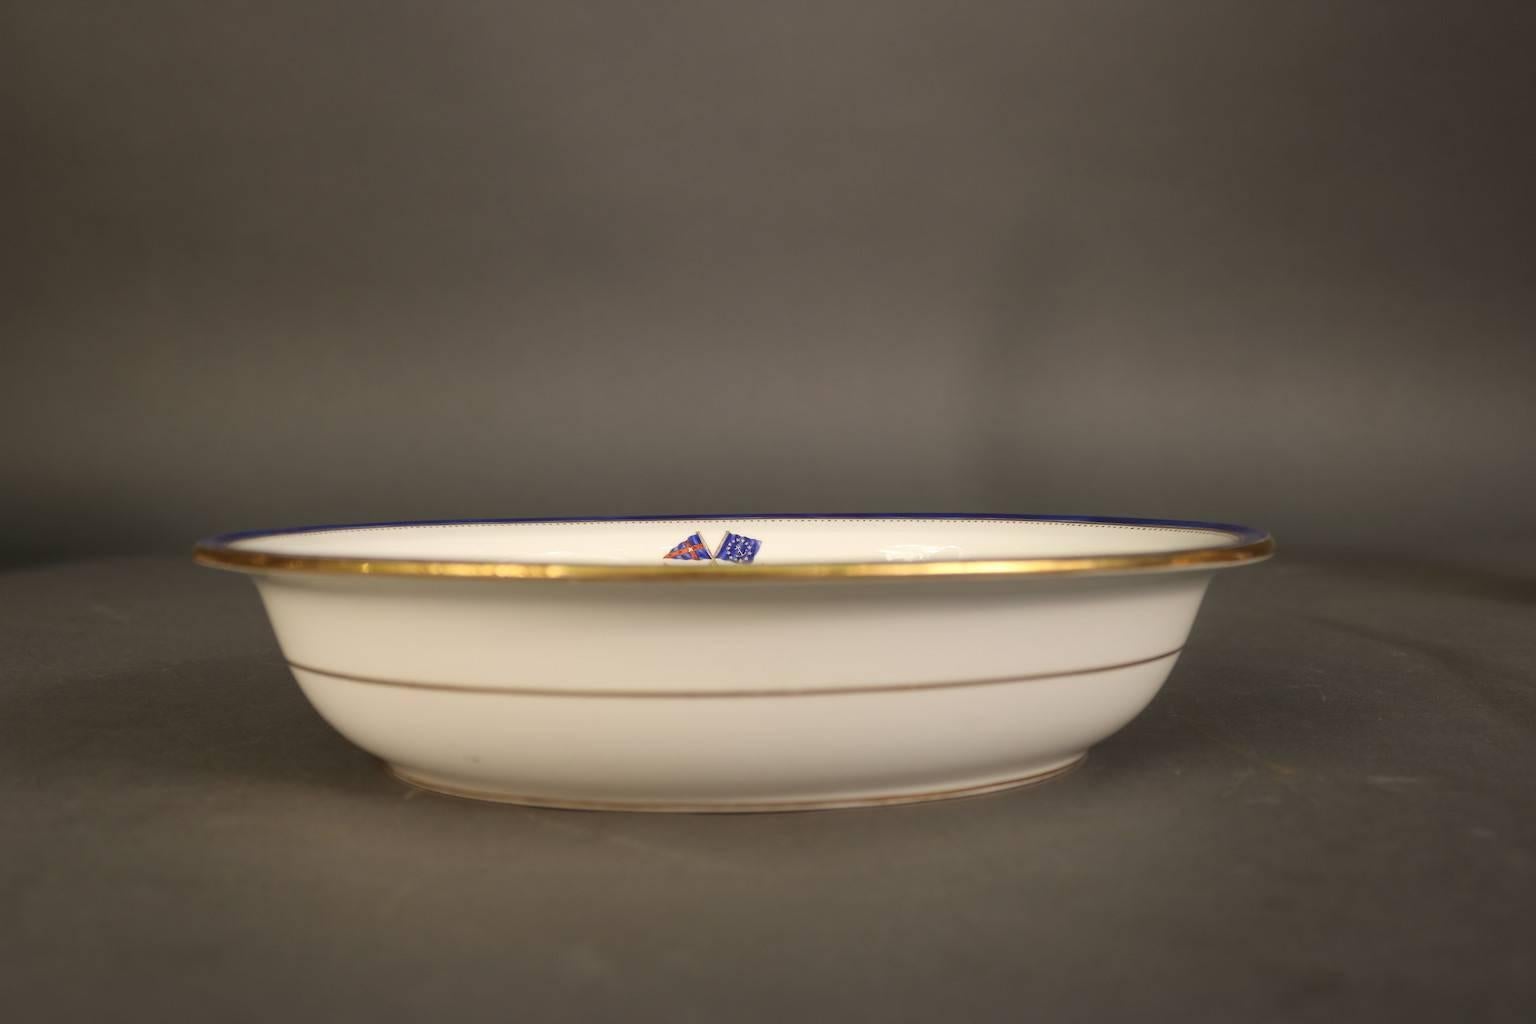 Personal dinnerware made exclusively for J. Pierpont Morgan (1837-1913) for use aboard his Flagship Corsair, built in 1890. This 8” Flagship Corsair Vegetable Side Plate Bowl by Minton's has the J. Pierpont Morgan signature navy blue trim with gold